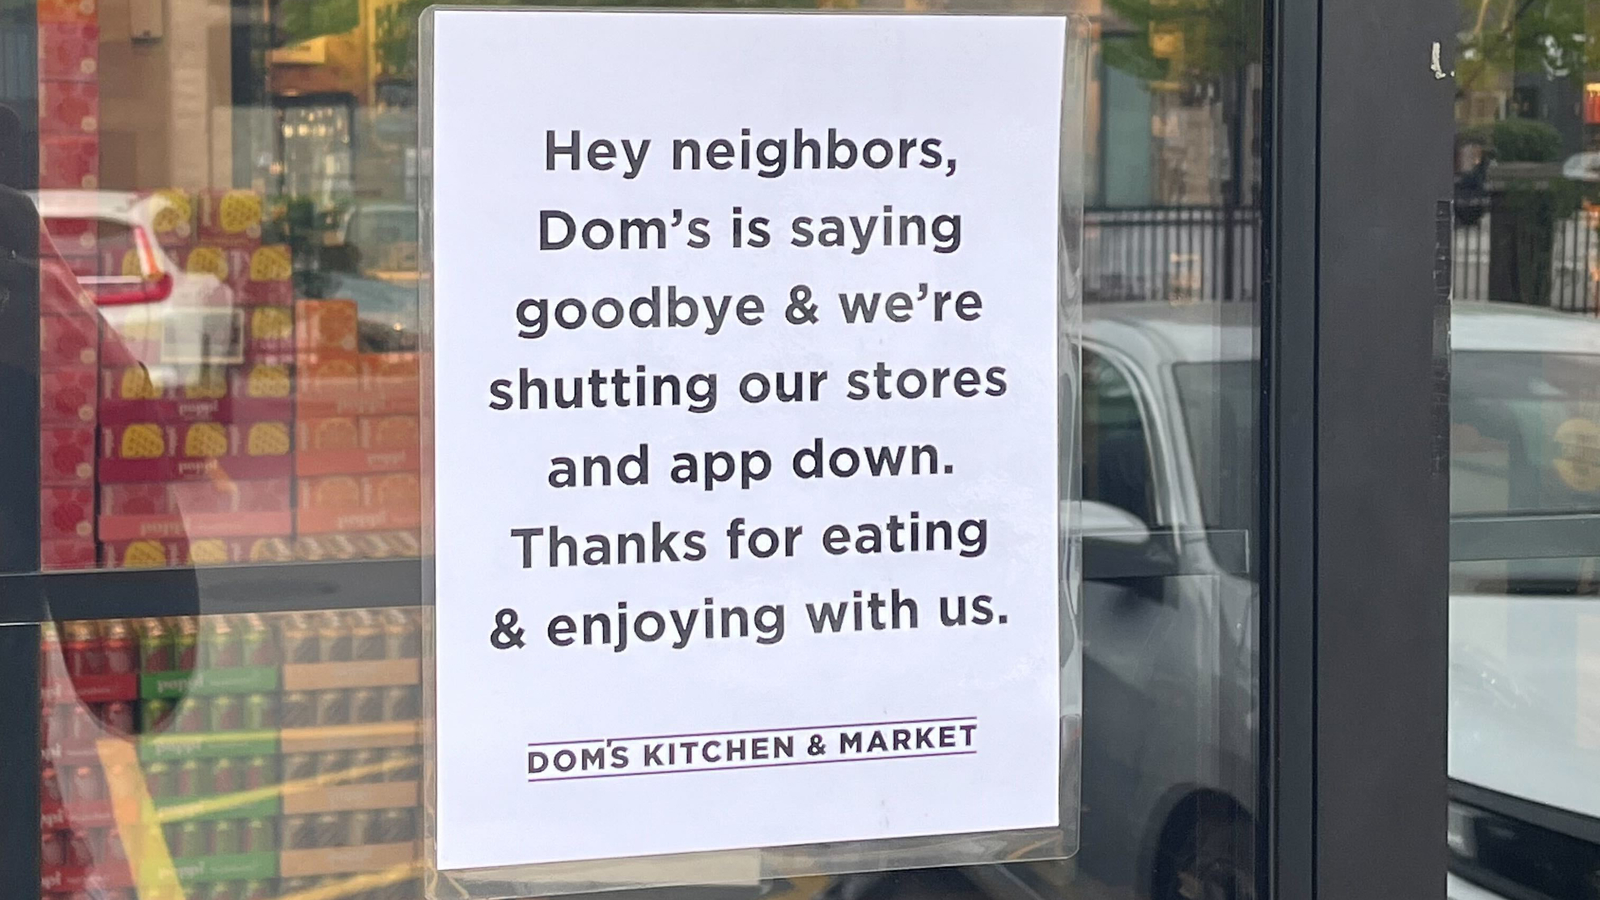 Chicago-based grocers Dom’s Kitchen & Market, Foxtrot closing over 30 stores in city, Texas, Washington, D.C. [Video]